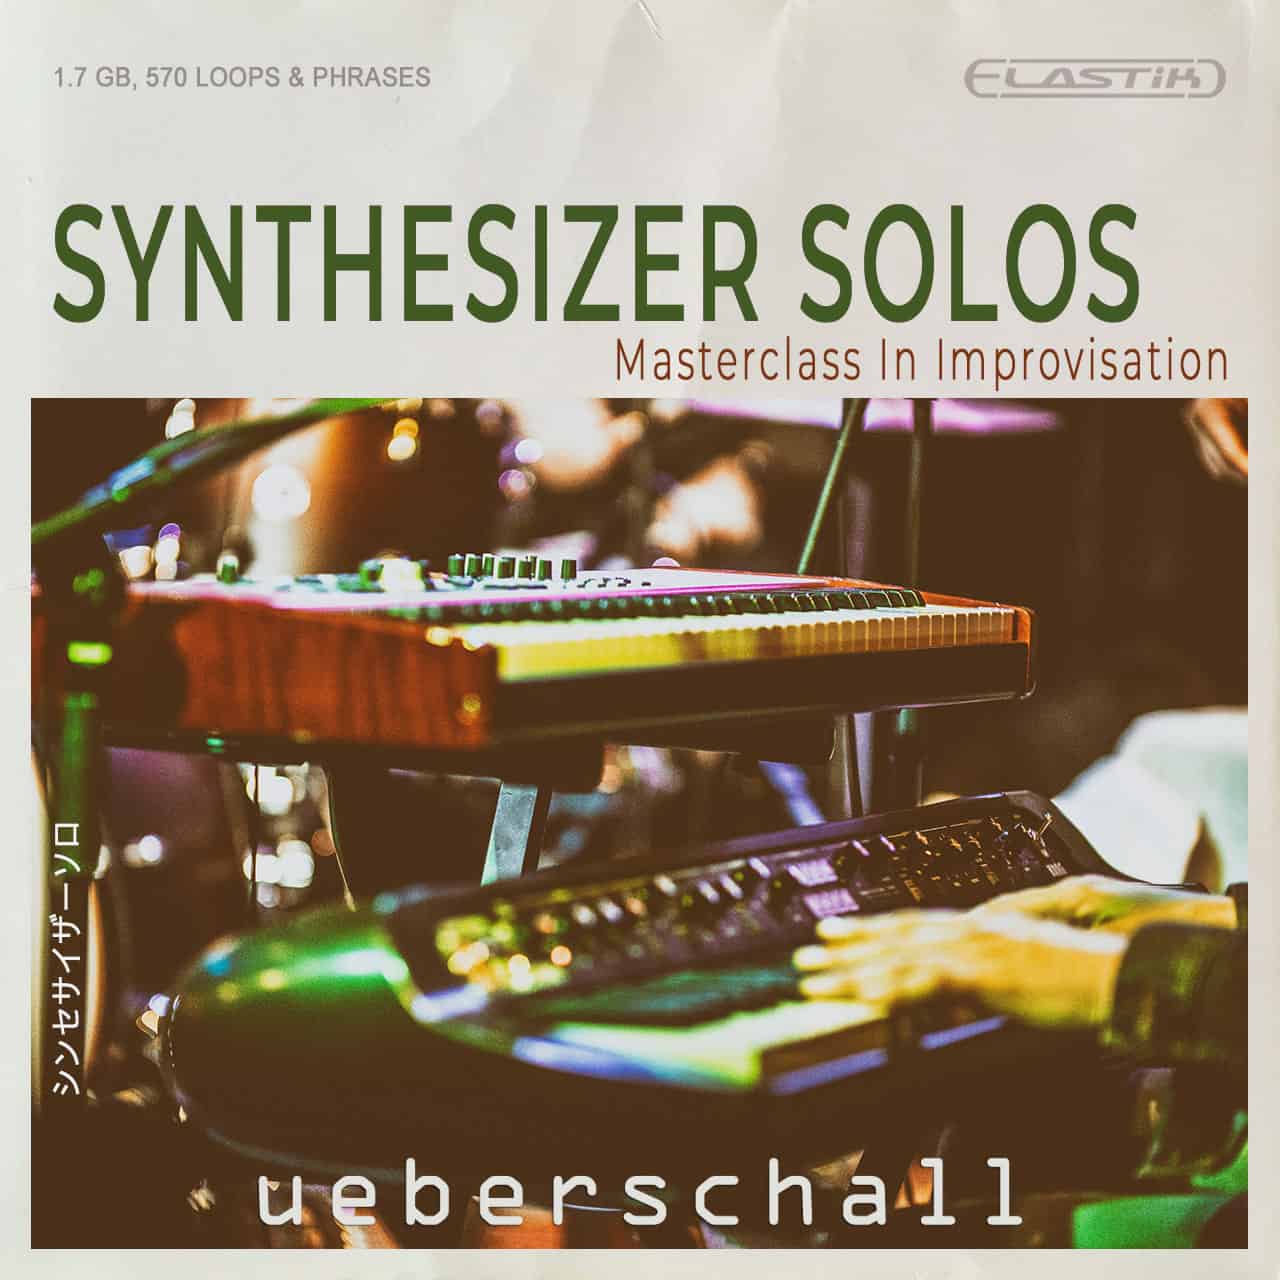 Ueberschall Recorded Solo Improvisation Masterclass – Synthesizer Solos